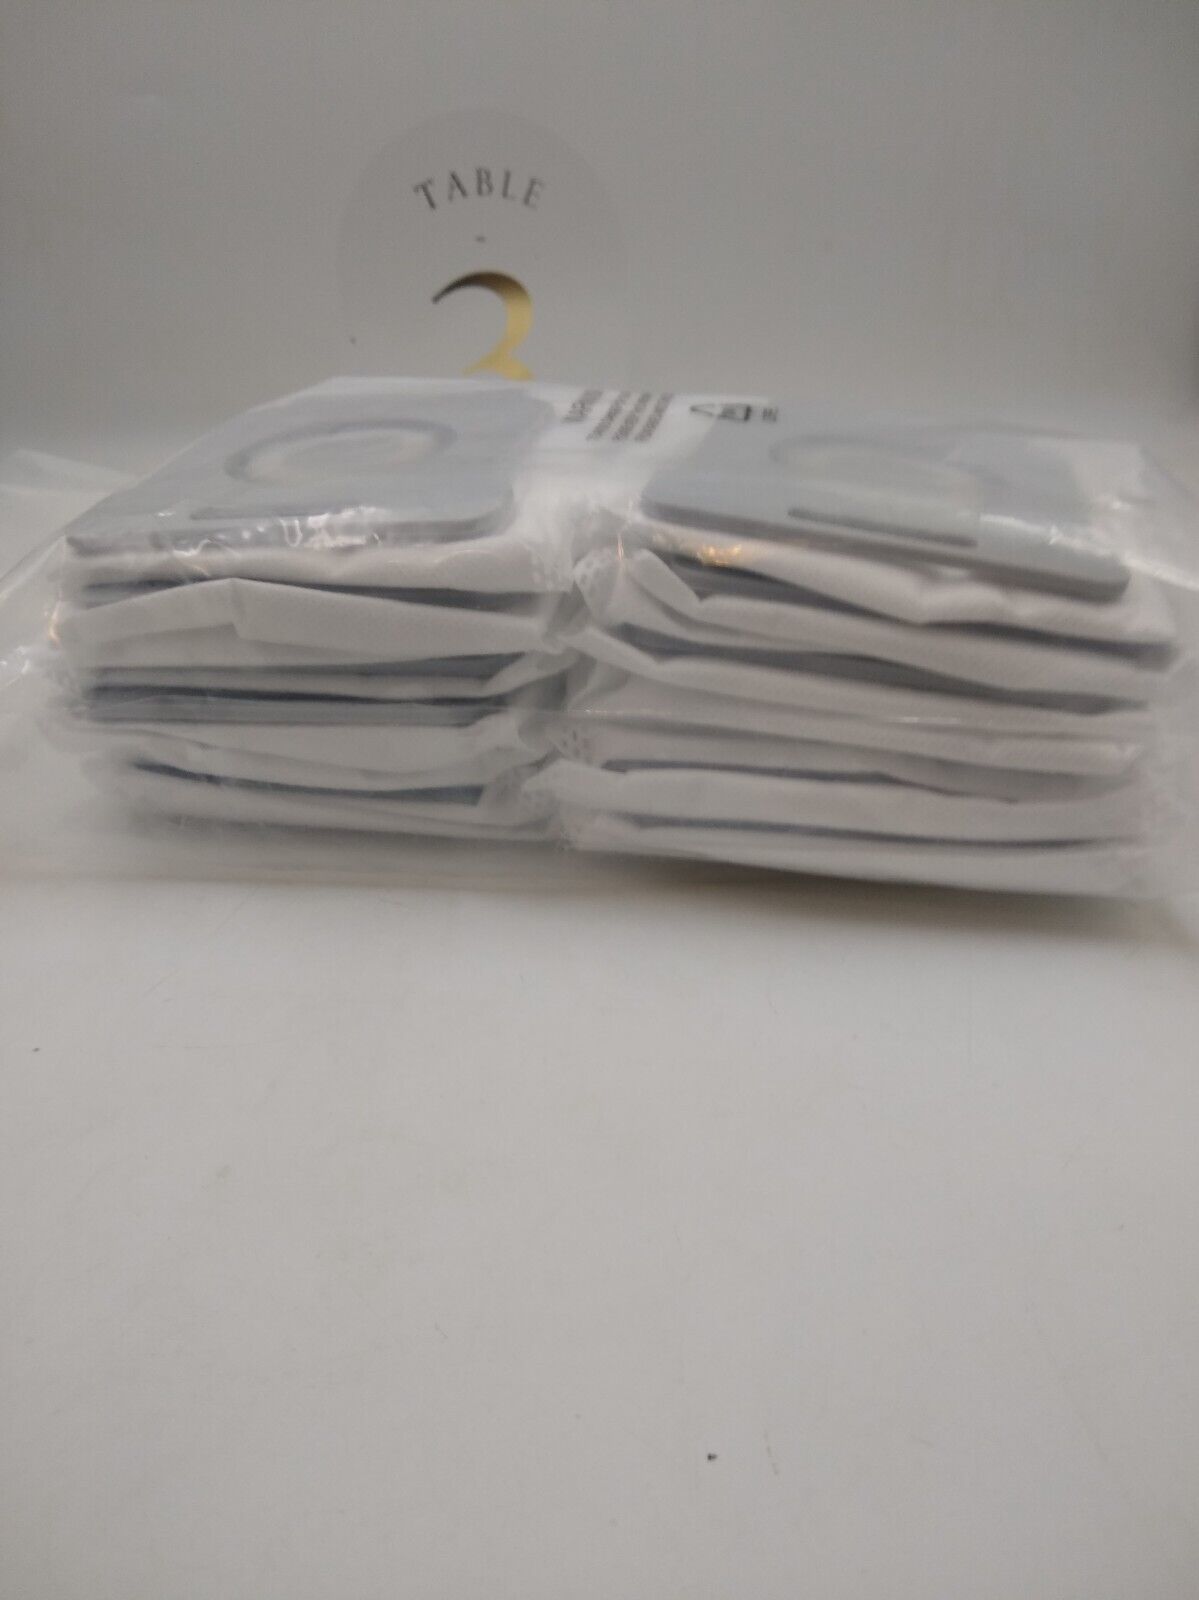 EZ SPARES Compatible with lR0B0T R0MBA Dust Bags i7 i7+, lR0B0T Roomba Clean Bas - $31.50